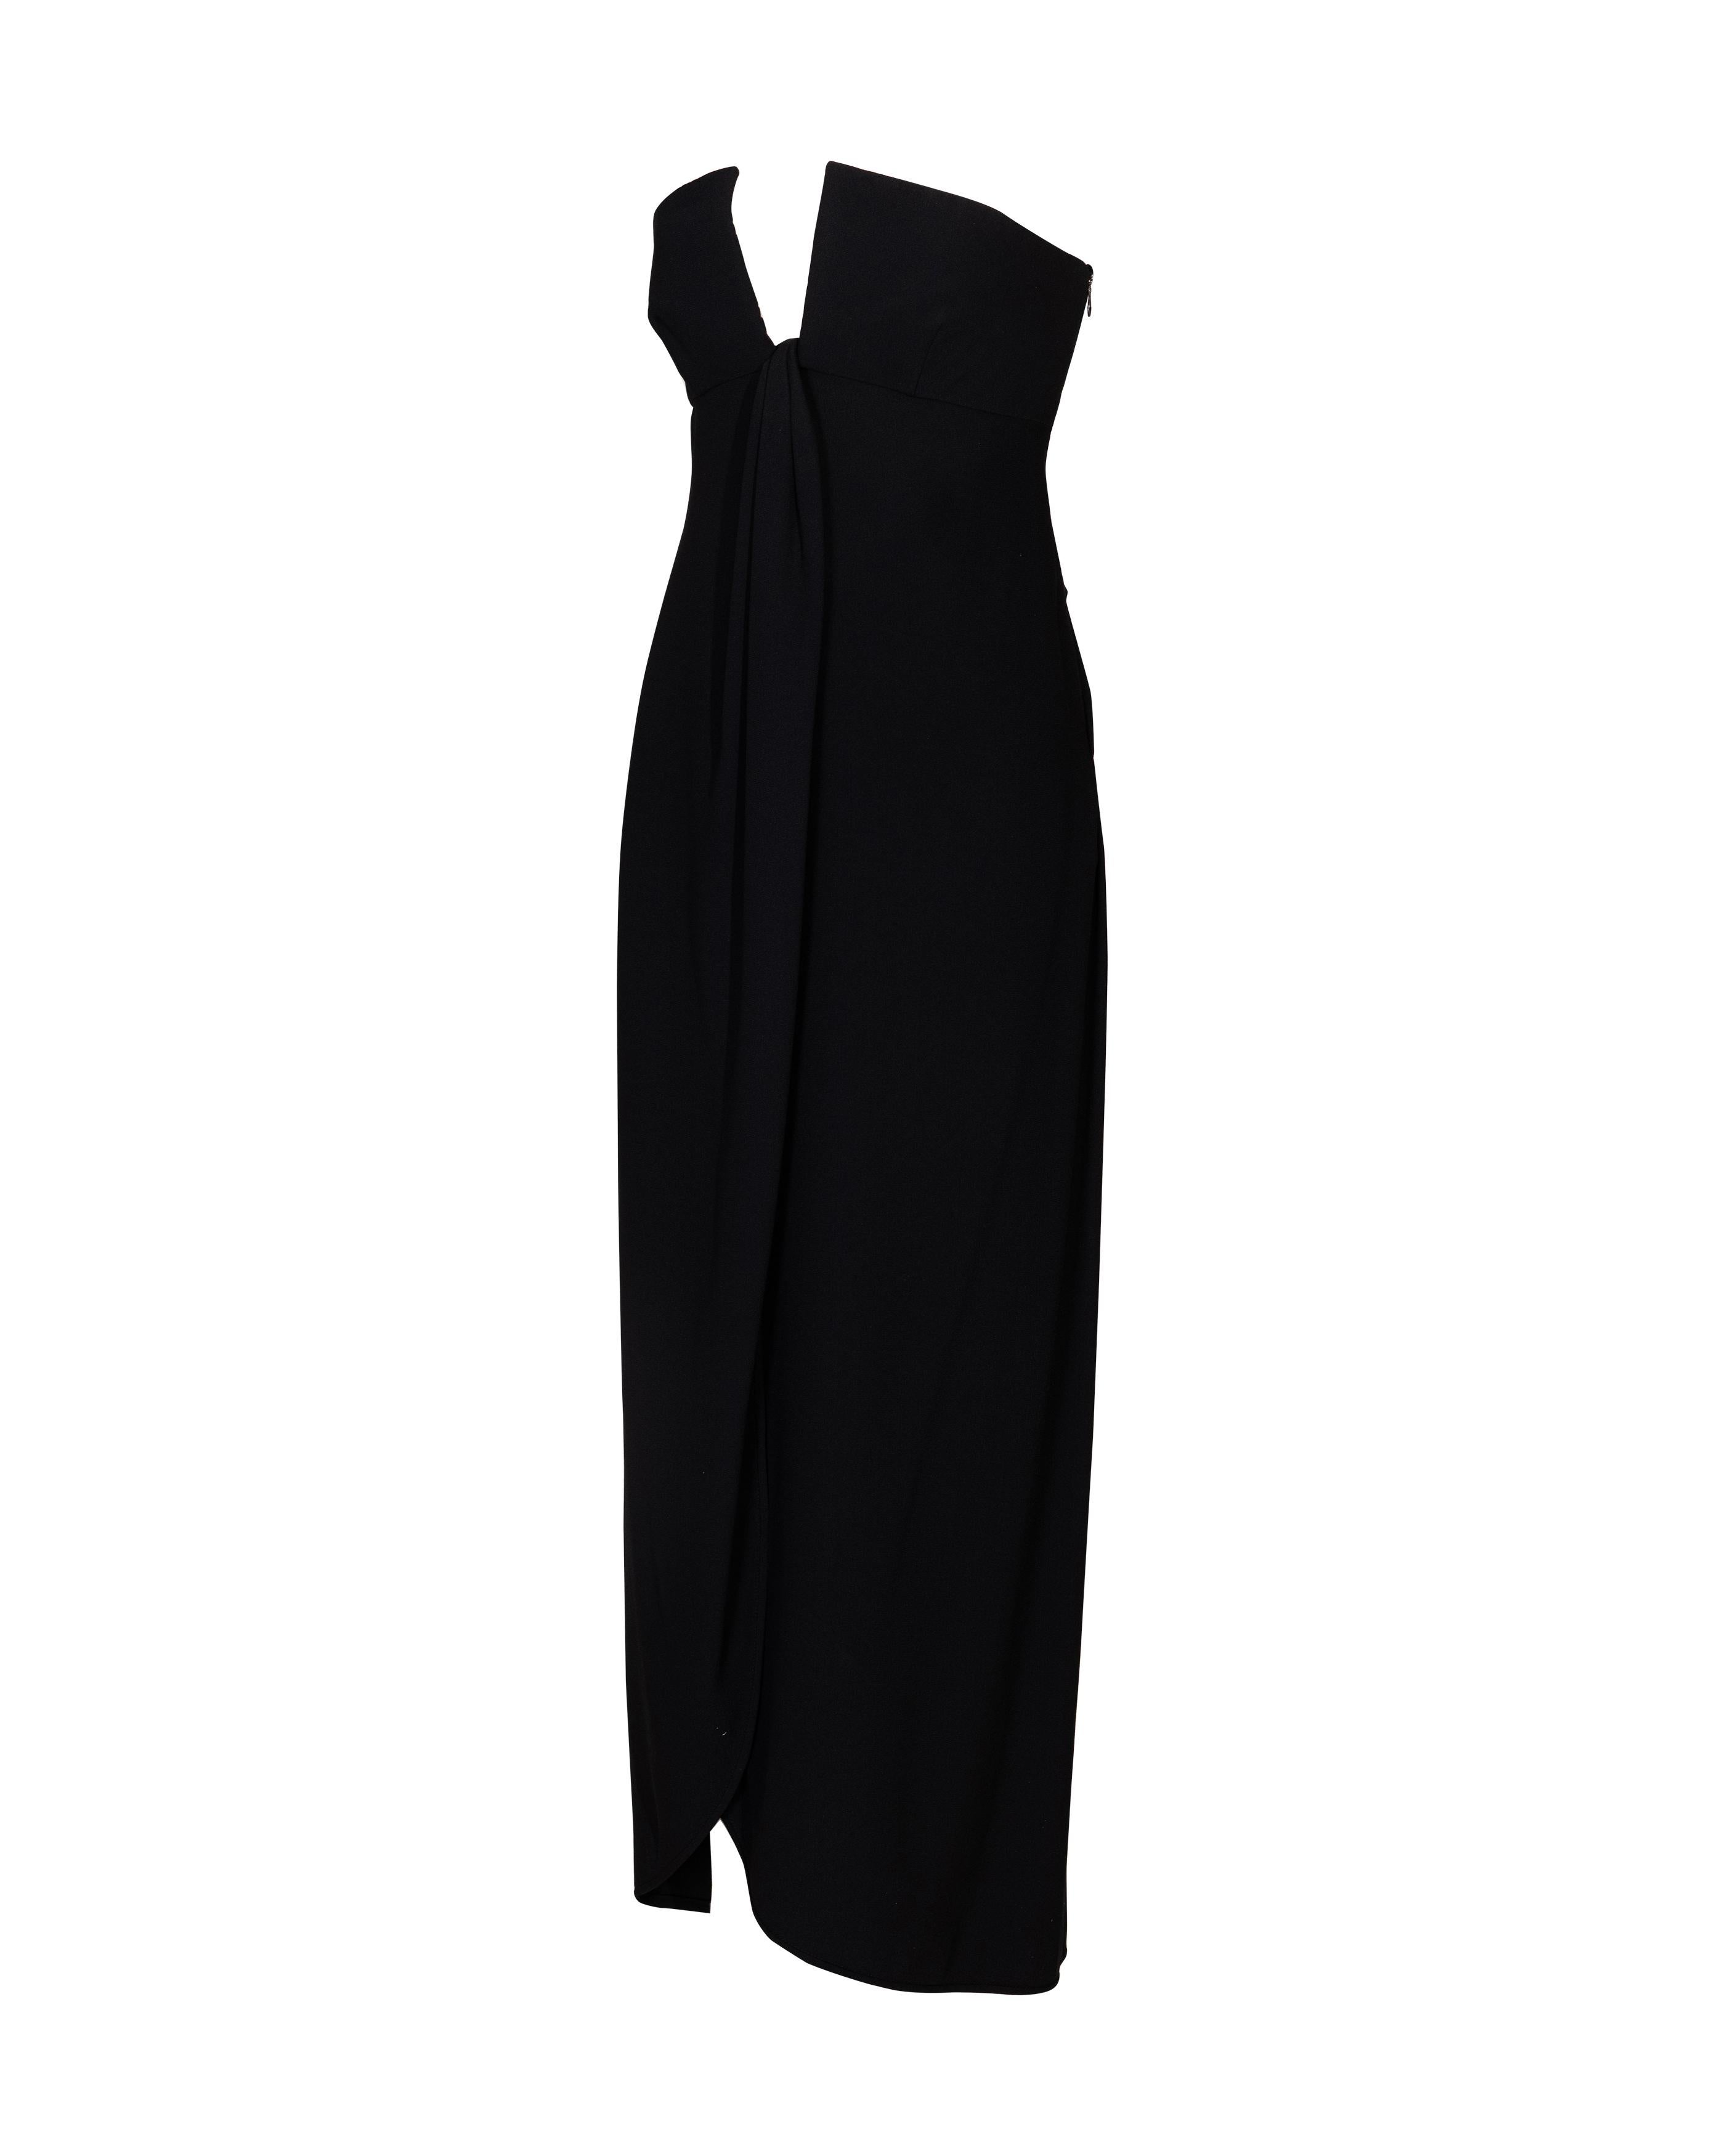 S/S 2000 Valentino Black Strapless Gown with Open Bust In Good Condition For Sale In North Hollywood, CA